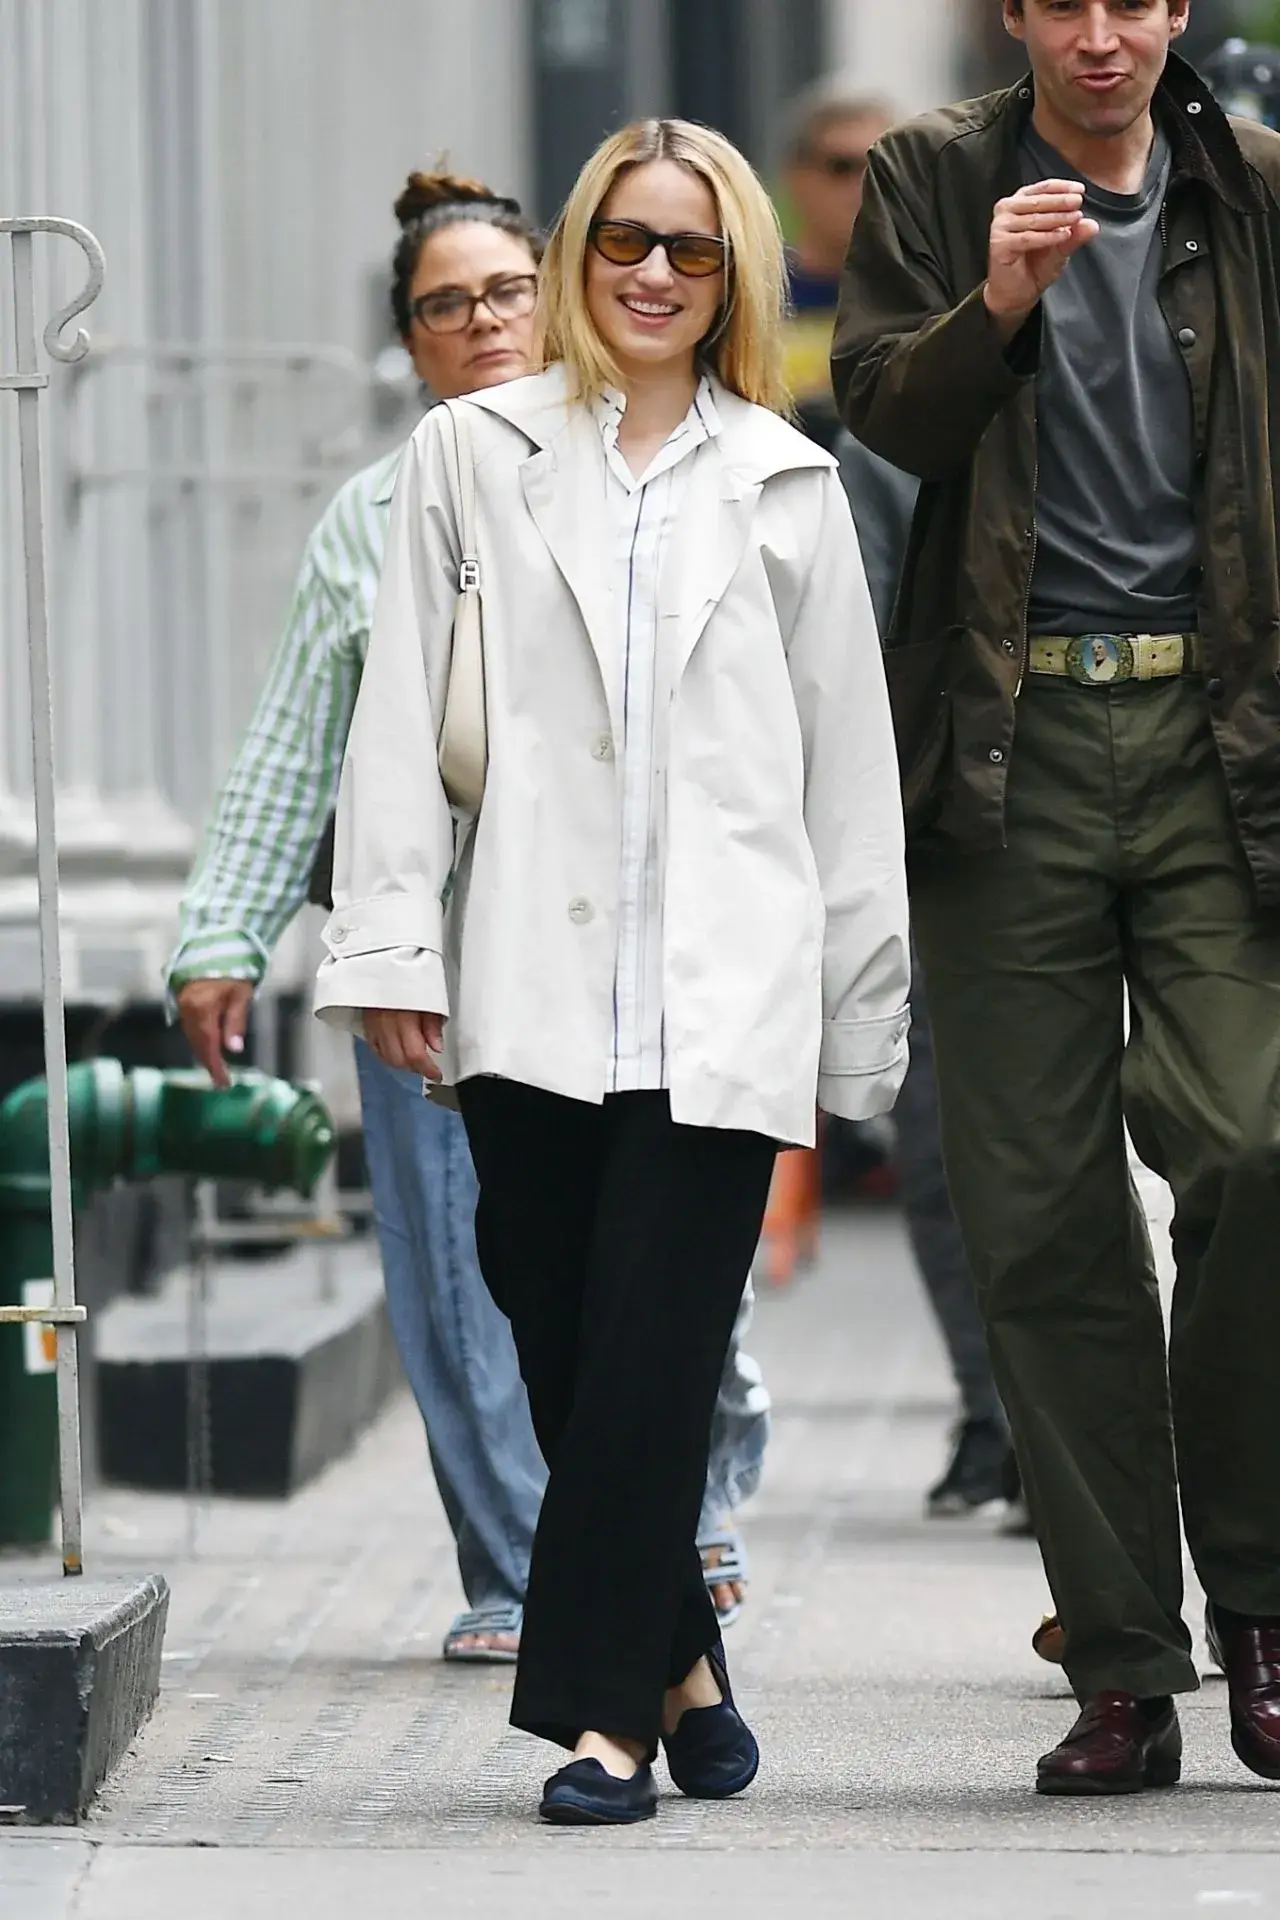 DIANNA AGRON AND HAROLD ANCART PHOTOS IN NEW YORK CITY STREETS